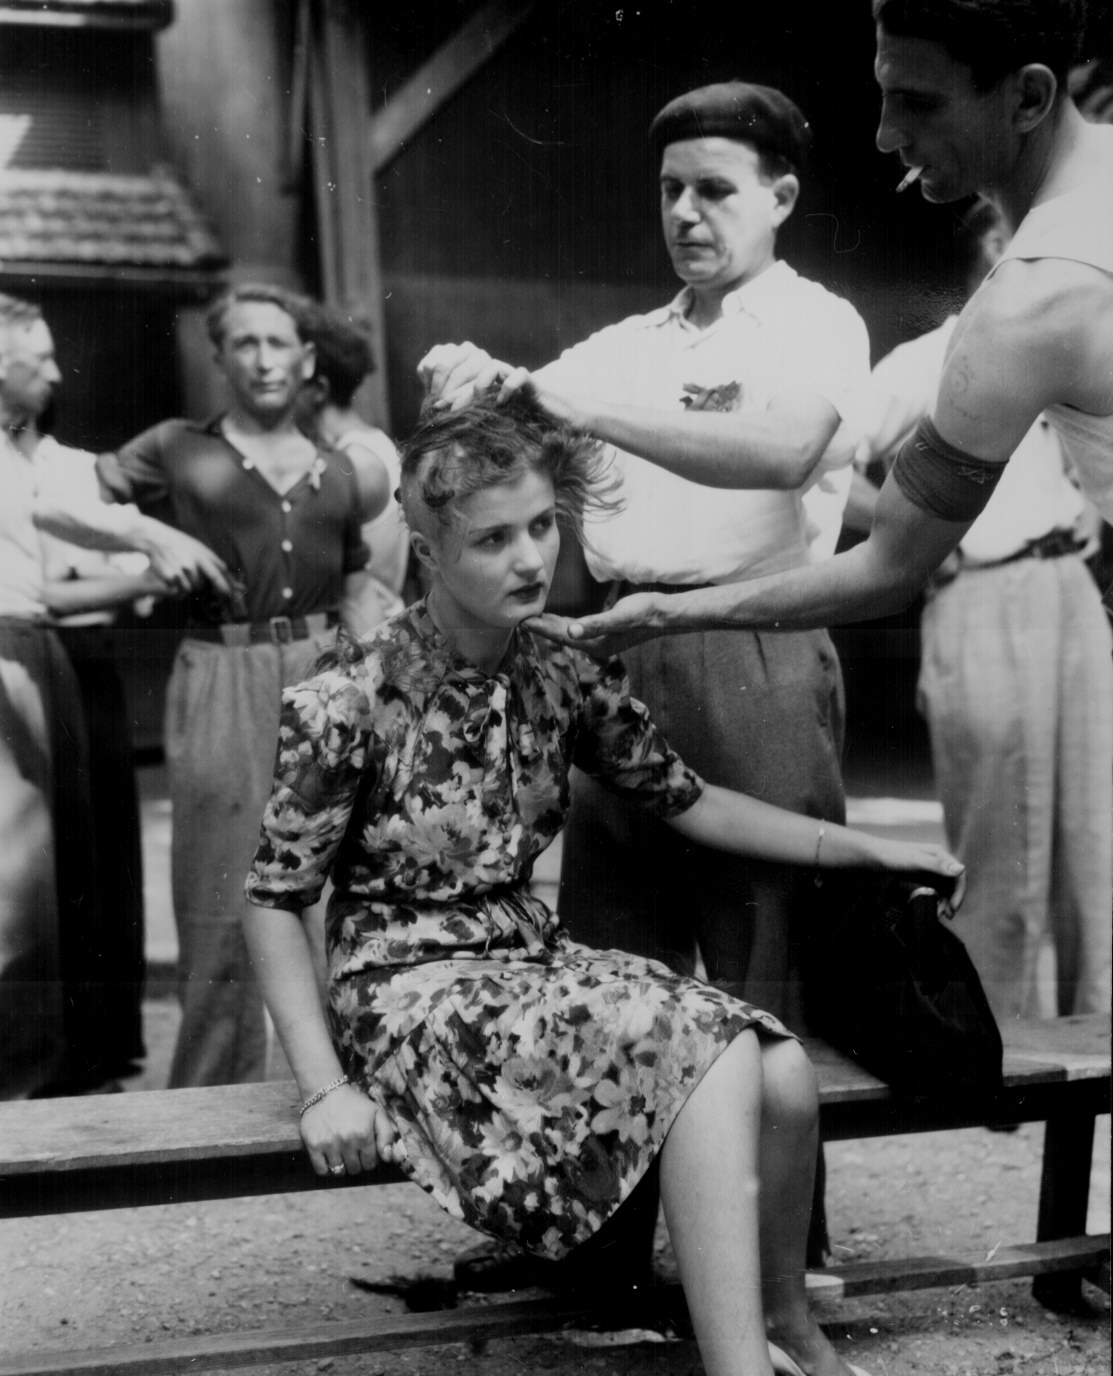 This girl pays the penalty for having had personal relations with the Germans. Here, in the Montelimar area, France, French civilians shave her head as punishment. (August 29, 1944). Source: U.S. National Archives, # 111-SC-193785.